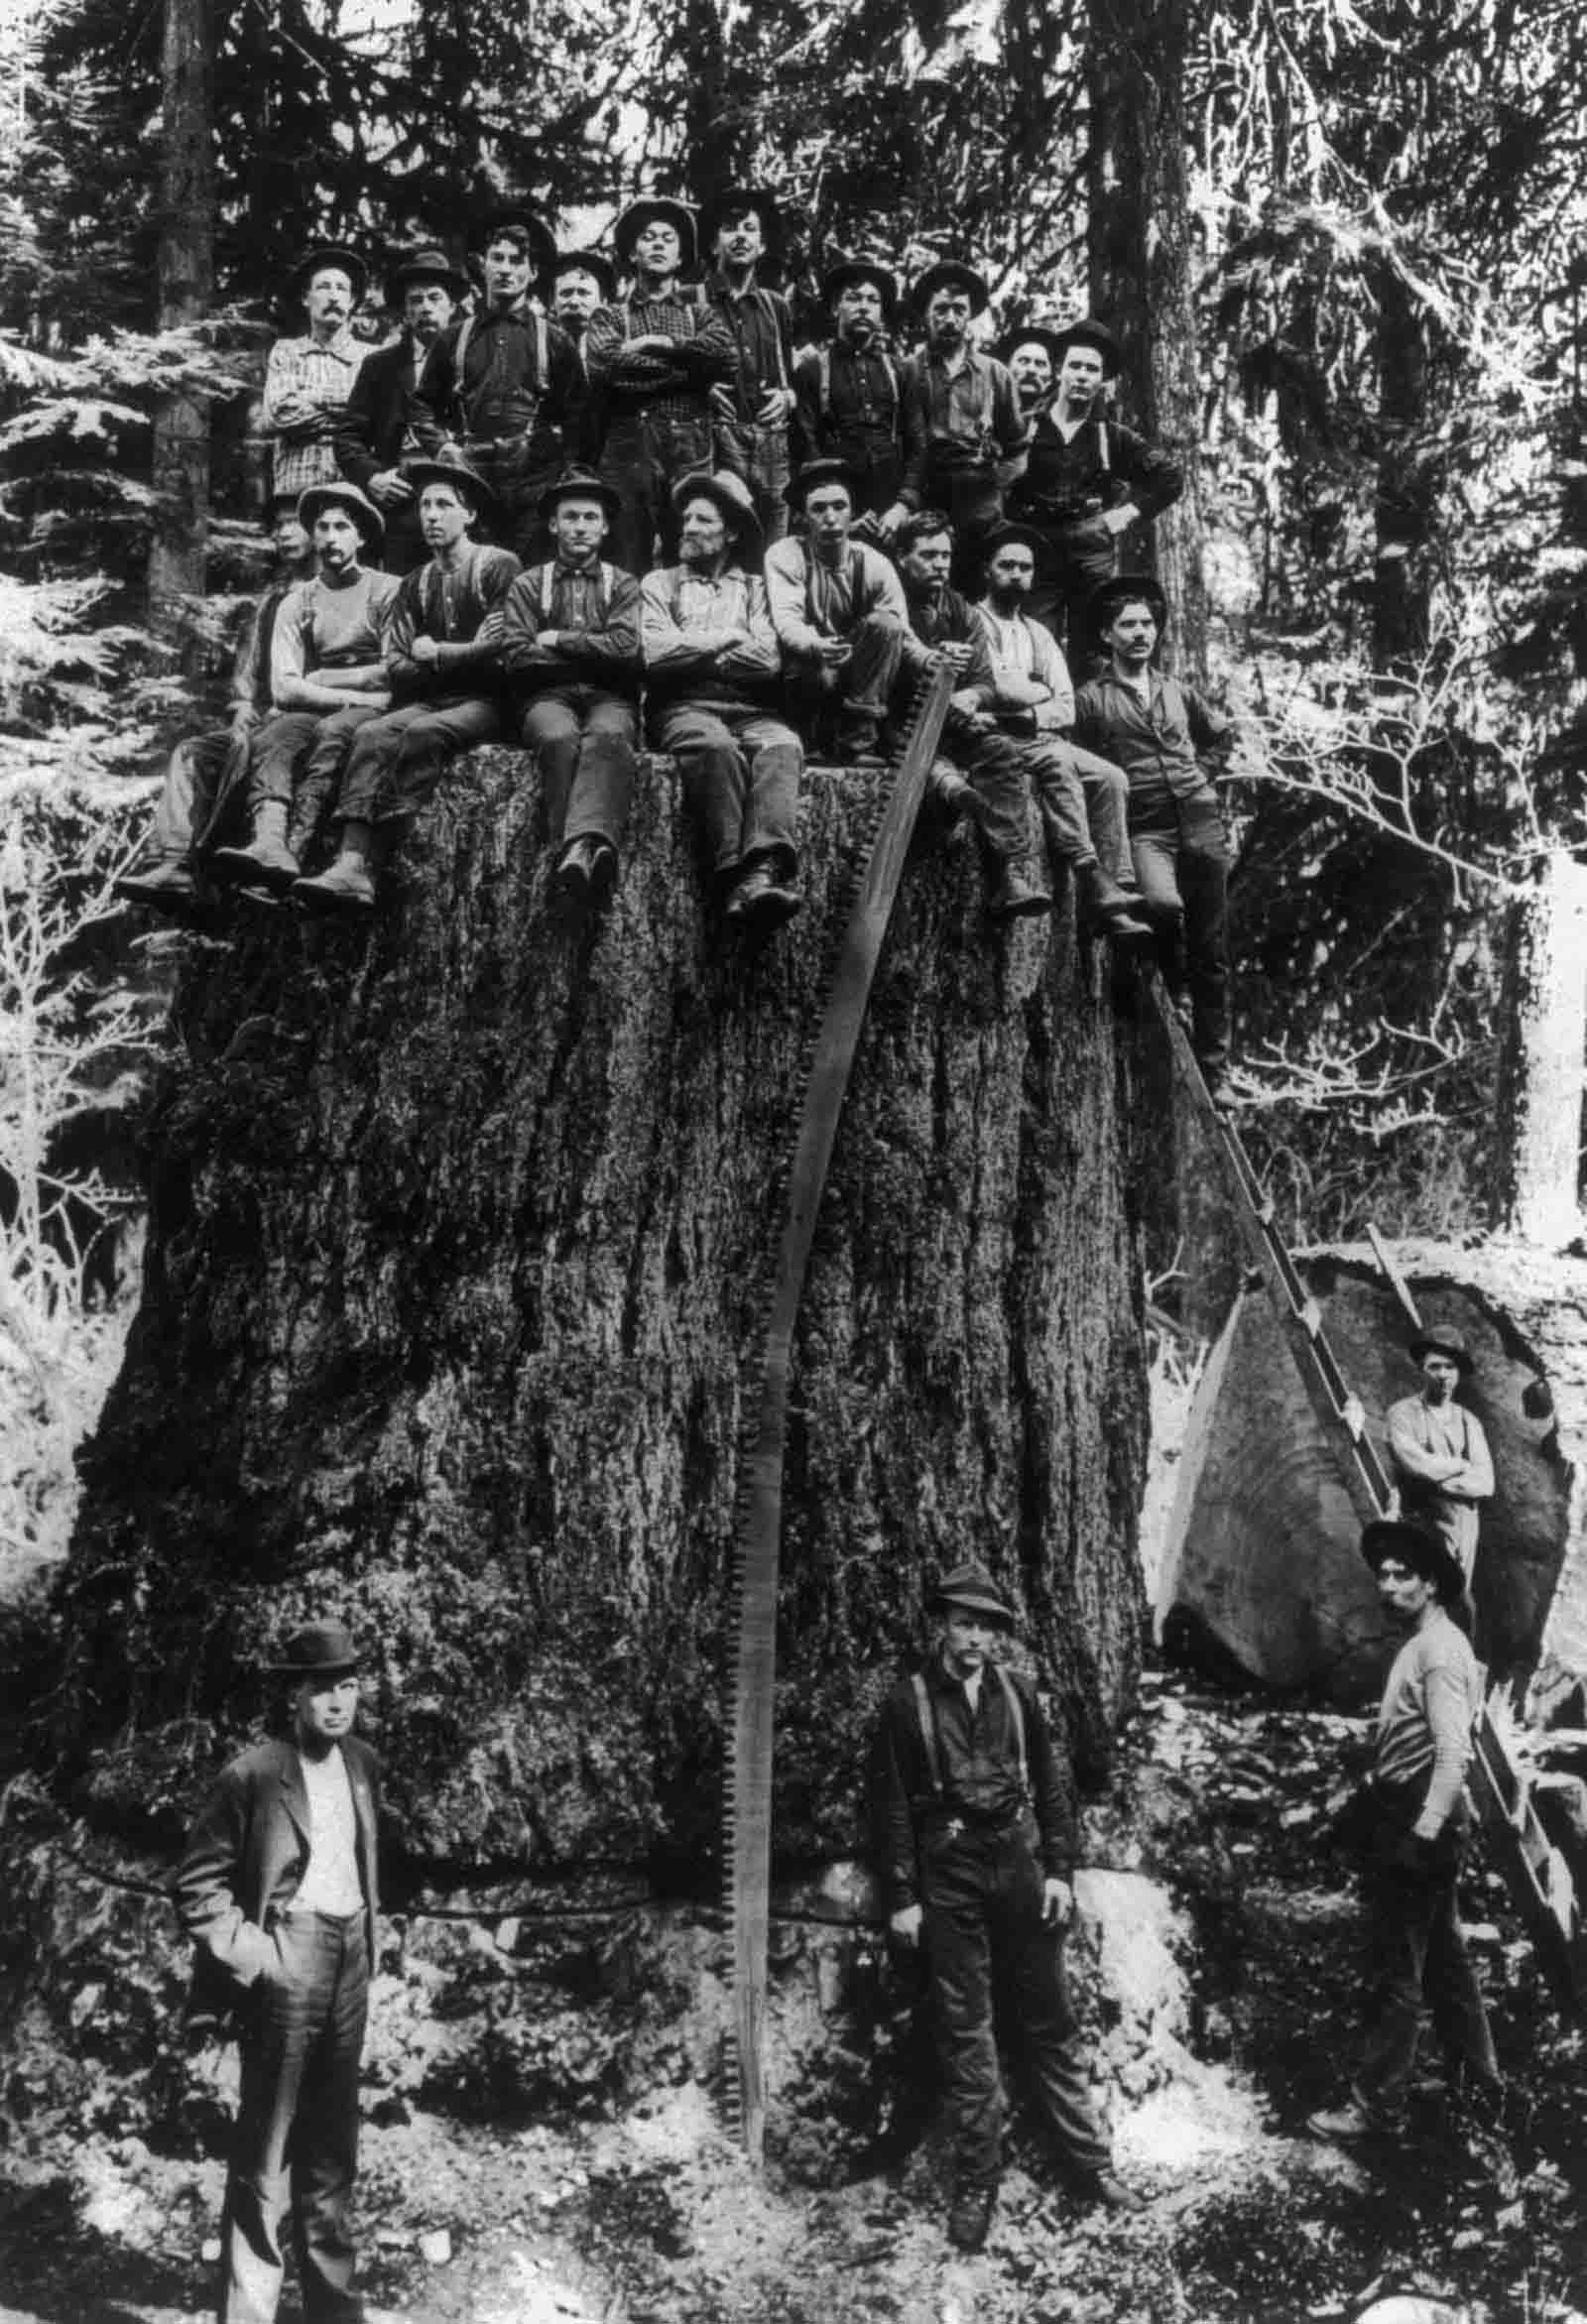 Lumberjacks pose on the stump of a tree which was displayed at St. Louis World’s Fair, 1904.